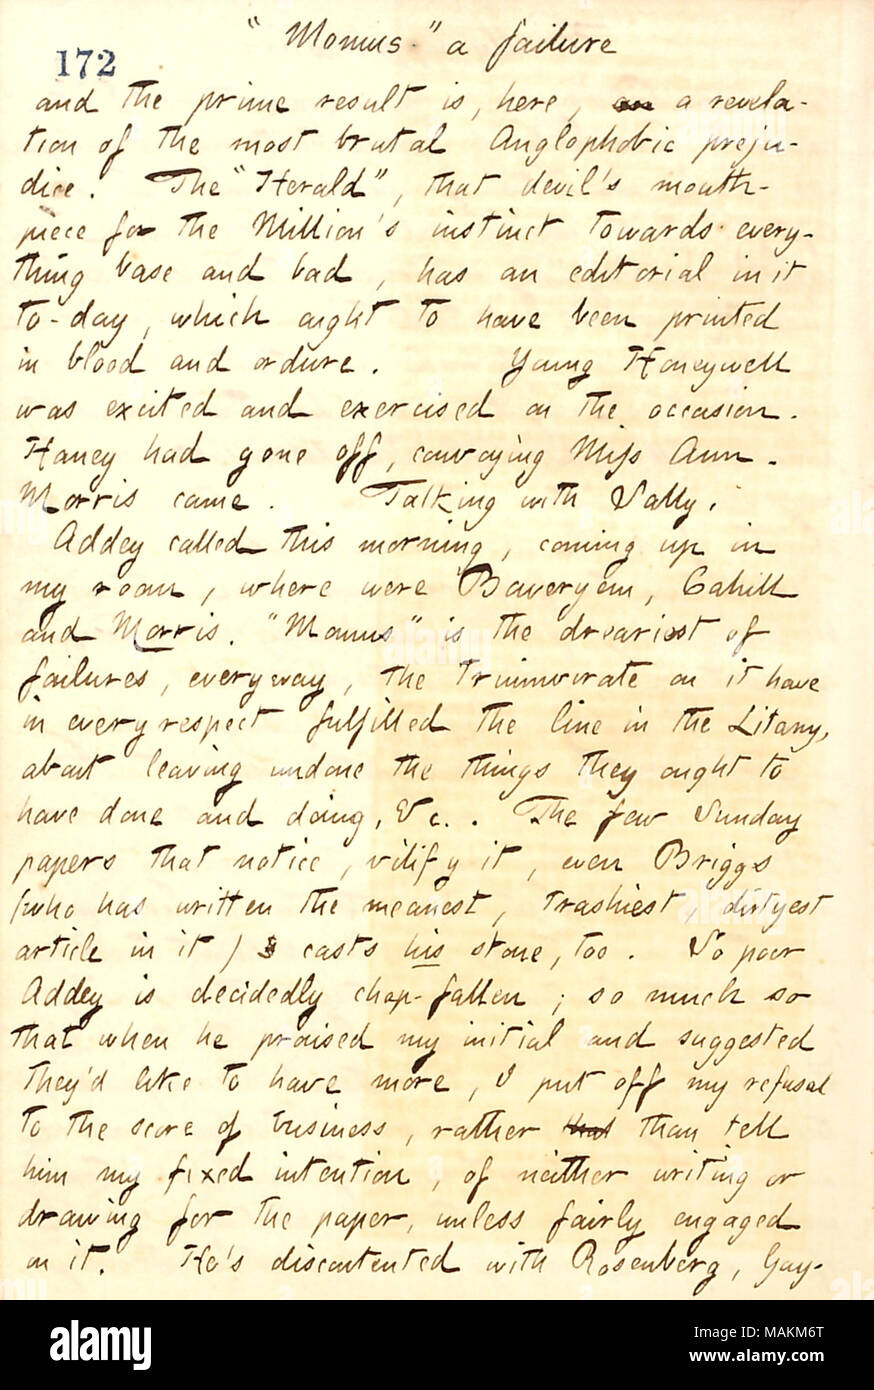 Regarding the failure of Momus.  Transcription: 'Momus' a failure and the prime result is, here, on a revelation of the most brutal Anglophobic prejudices. The 'Herald,' that devil's mouth-piece for the Million's instinct towards everything base and bad, has an editorial in it to-day, which ought to have been printed in blood and ordure. Young [Charles] Honeywell was excited and exercised on the occasion. [Jesse] Haney had gone off, convoying Miss Ann [Edwards]. [James] Morris came. Talking with Sally [Edwards]. [Henry] Addey called this morning, coming up in my room, where were [George] Bower Stock Photo